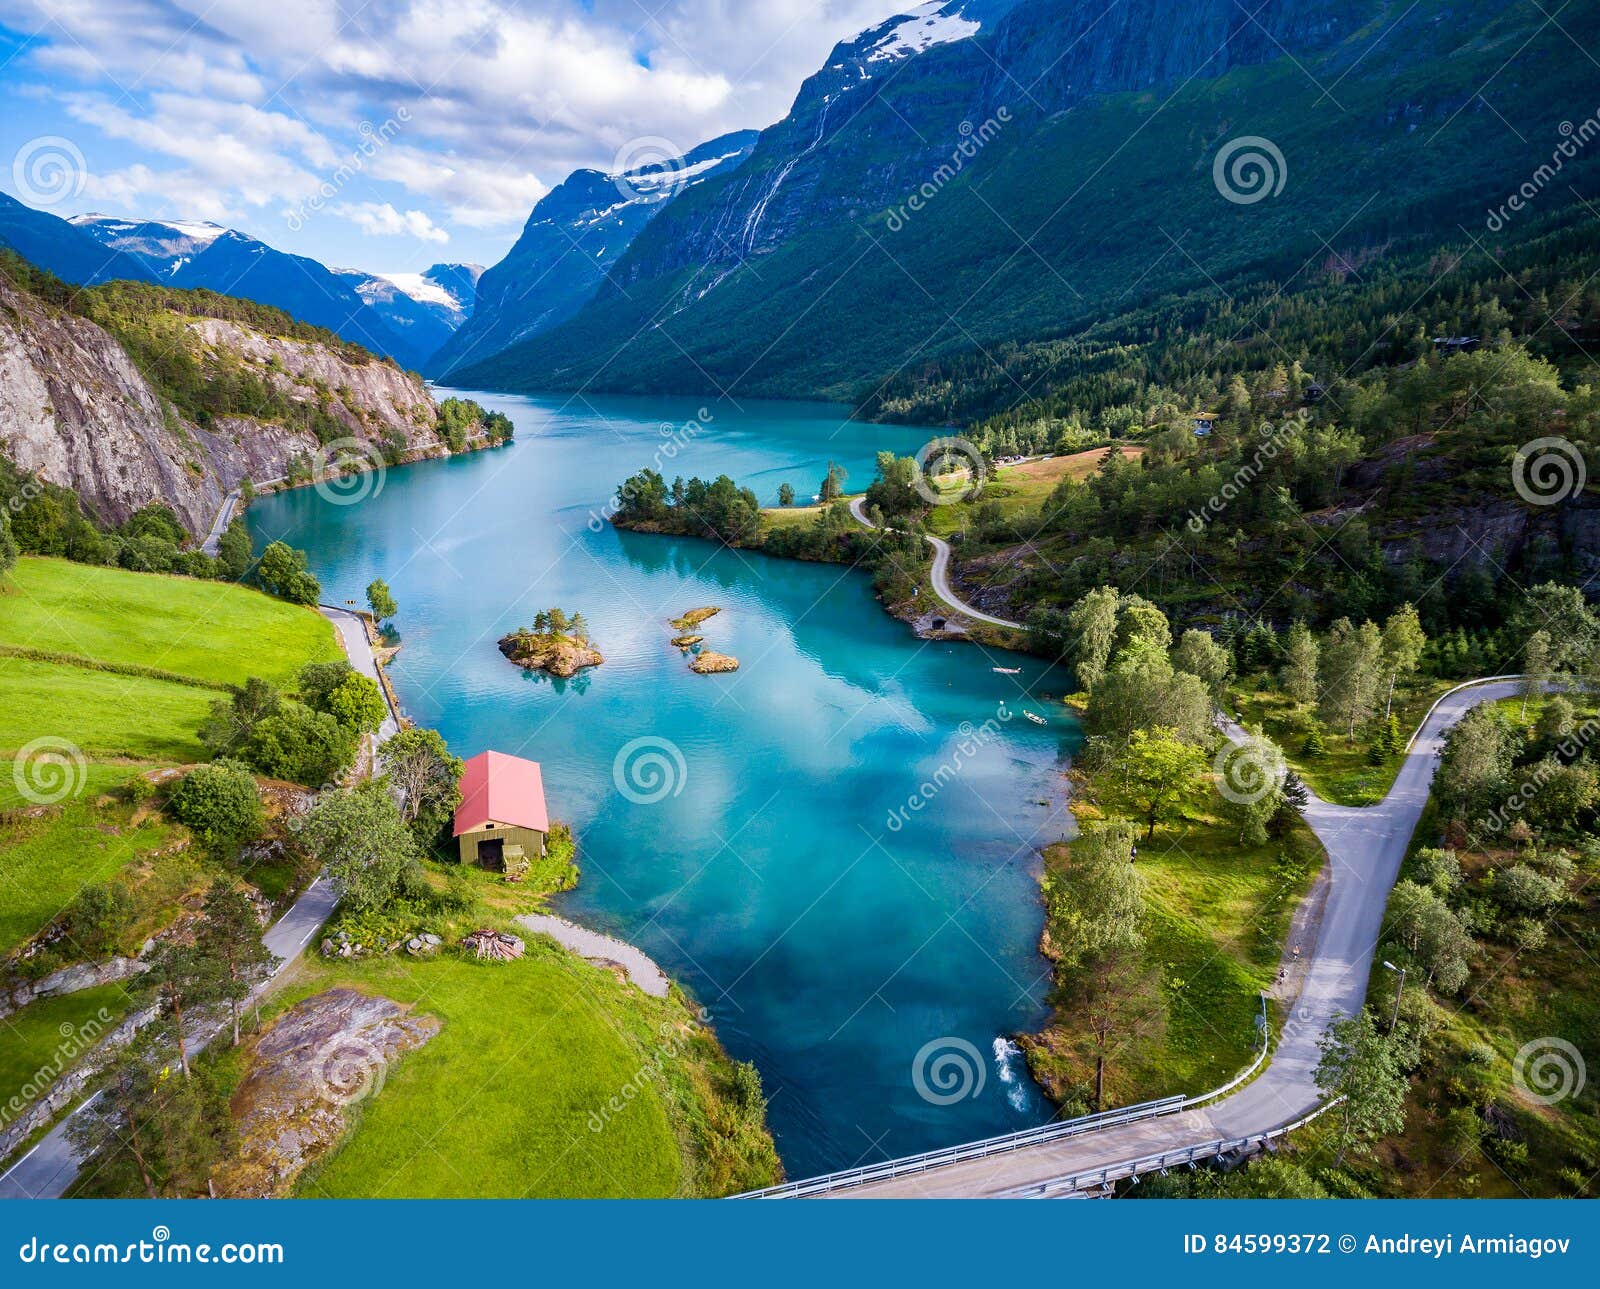 beautiful nature norway aerial photography.